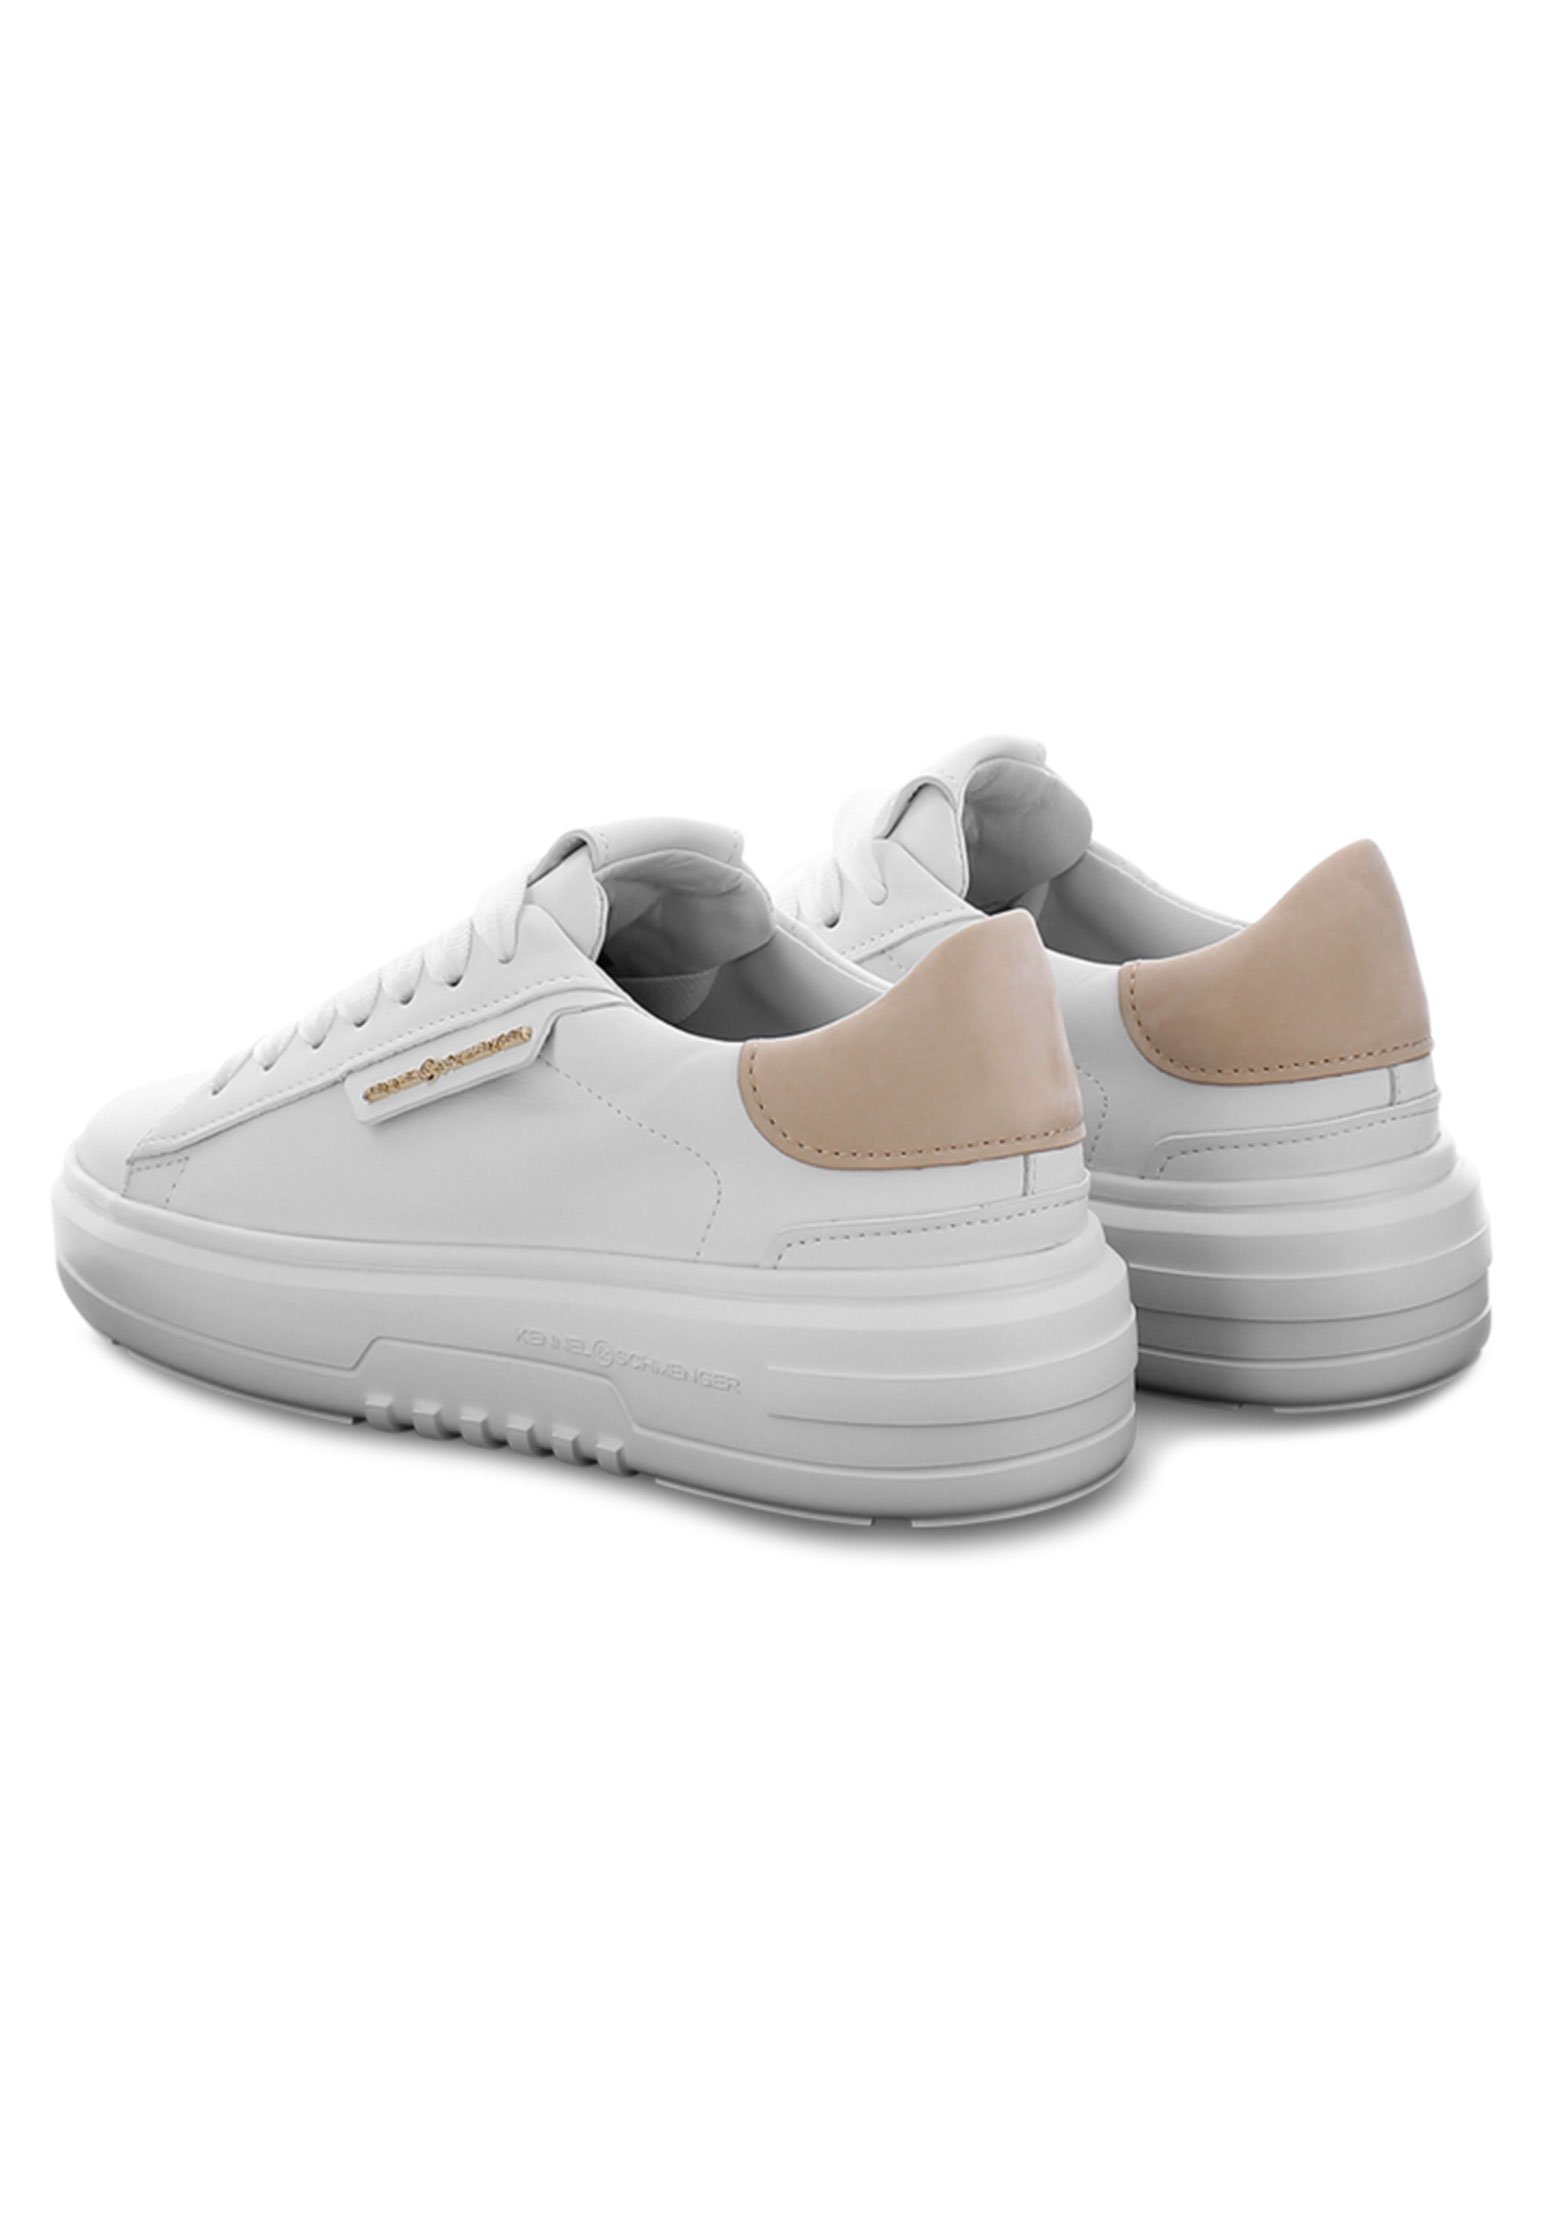 Sneakers KENNEL&SCHMENGER Color: white (Code: 4160) in online store Allure